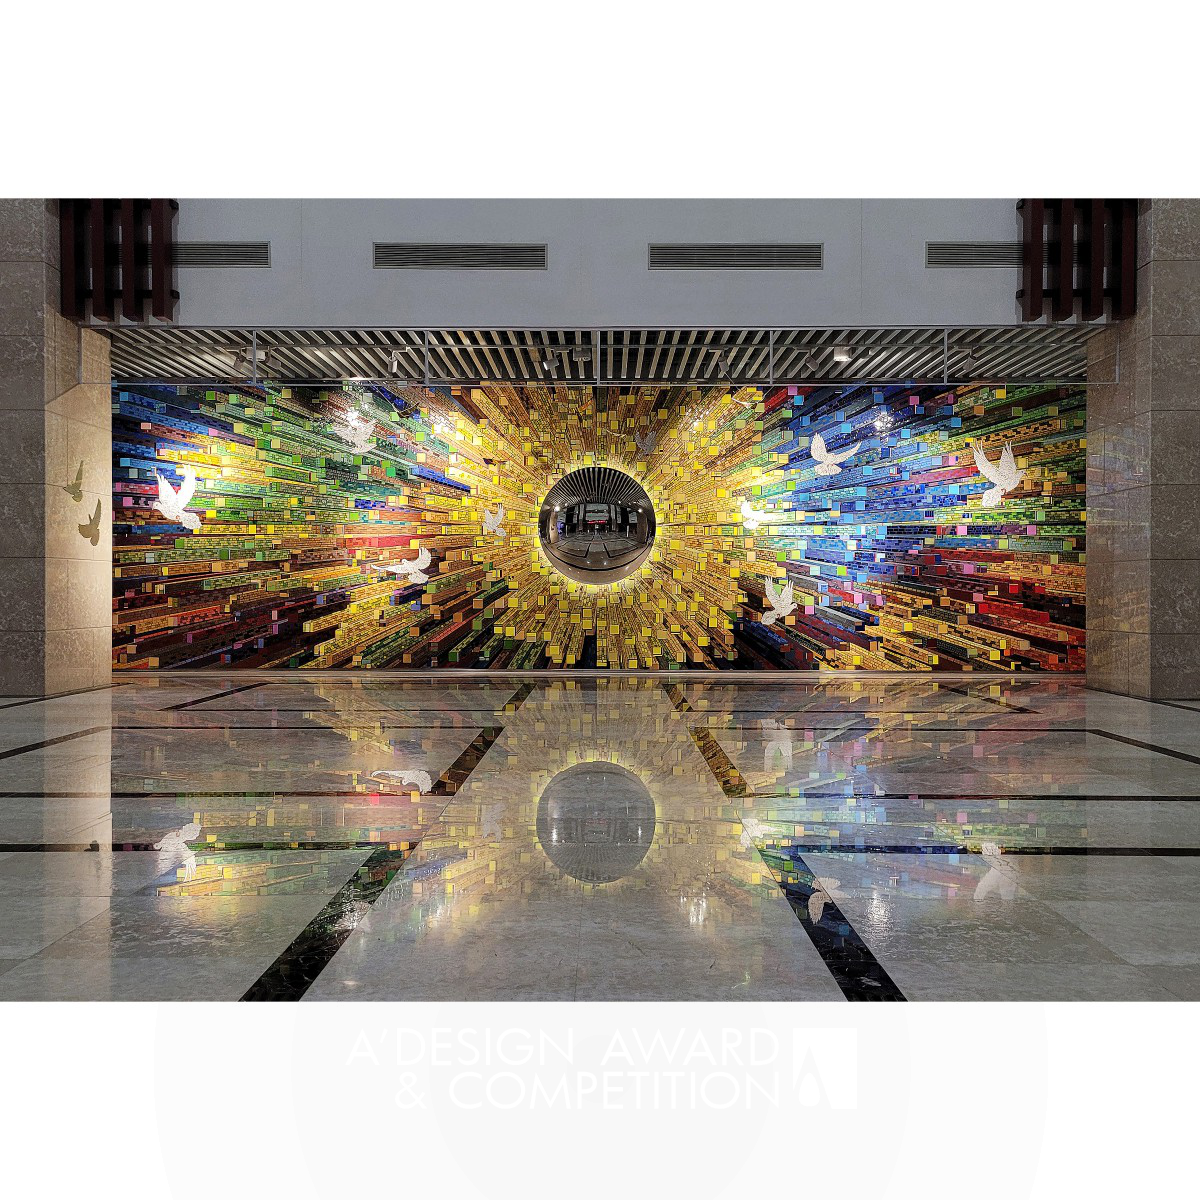 Shining in Wisdom and Glory Public Art by Kuo Hsiang Kuo Silver Fine Arts and Art Installation Design Award Winner 2021 